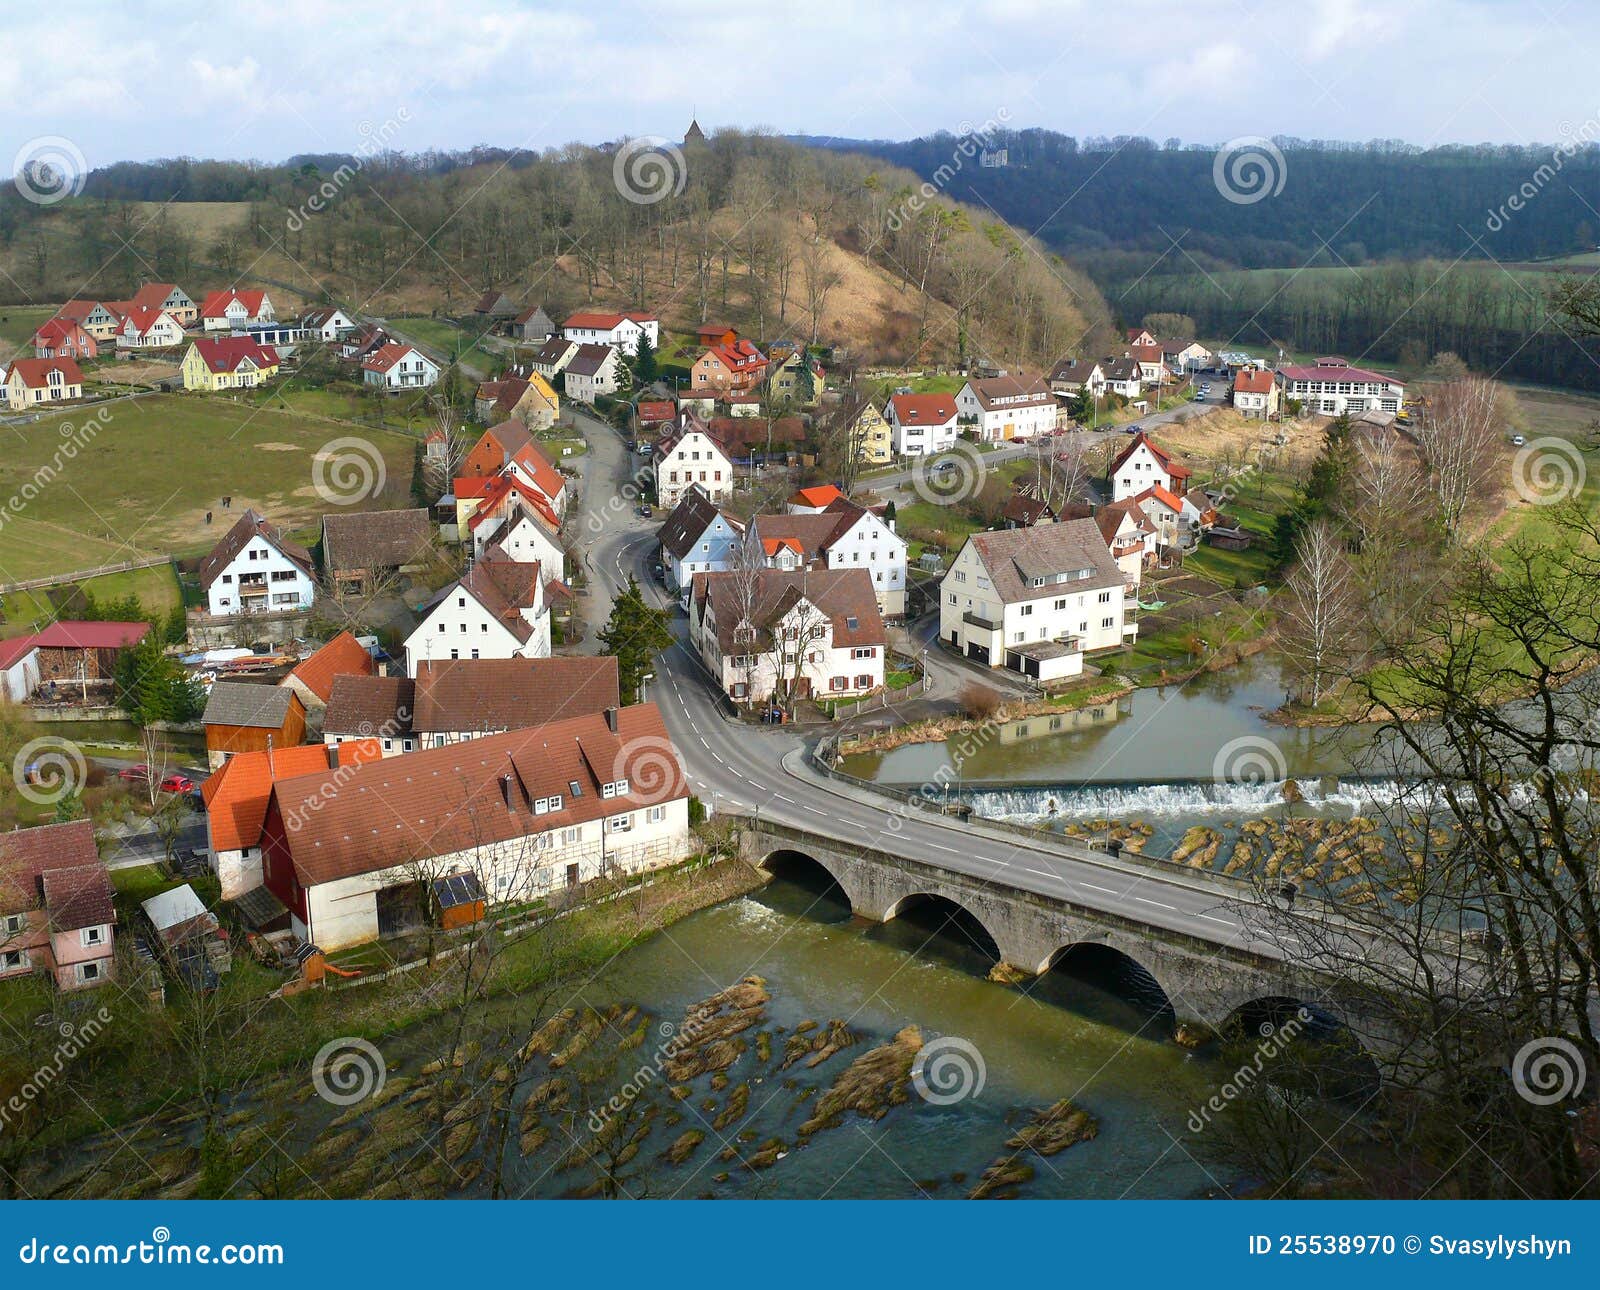 Scenery of small European town beside river and hills. Mostly all ...